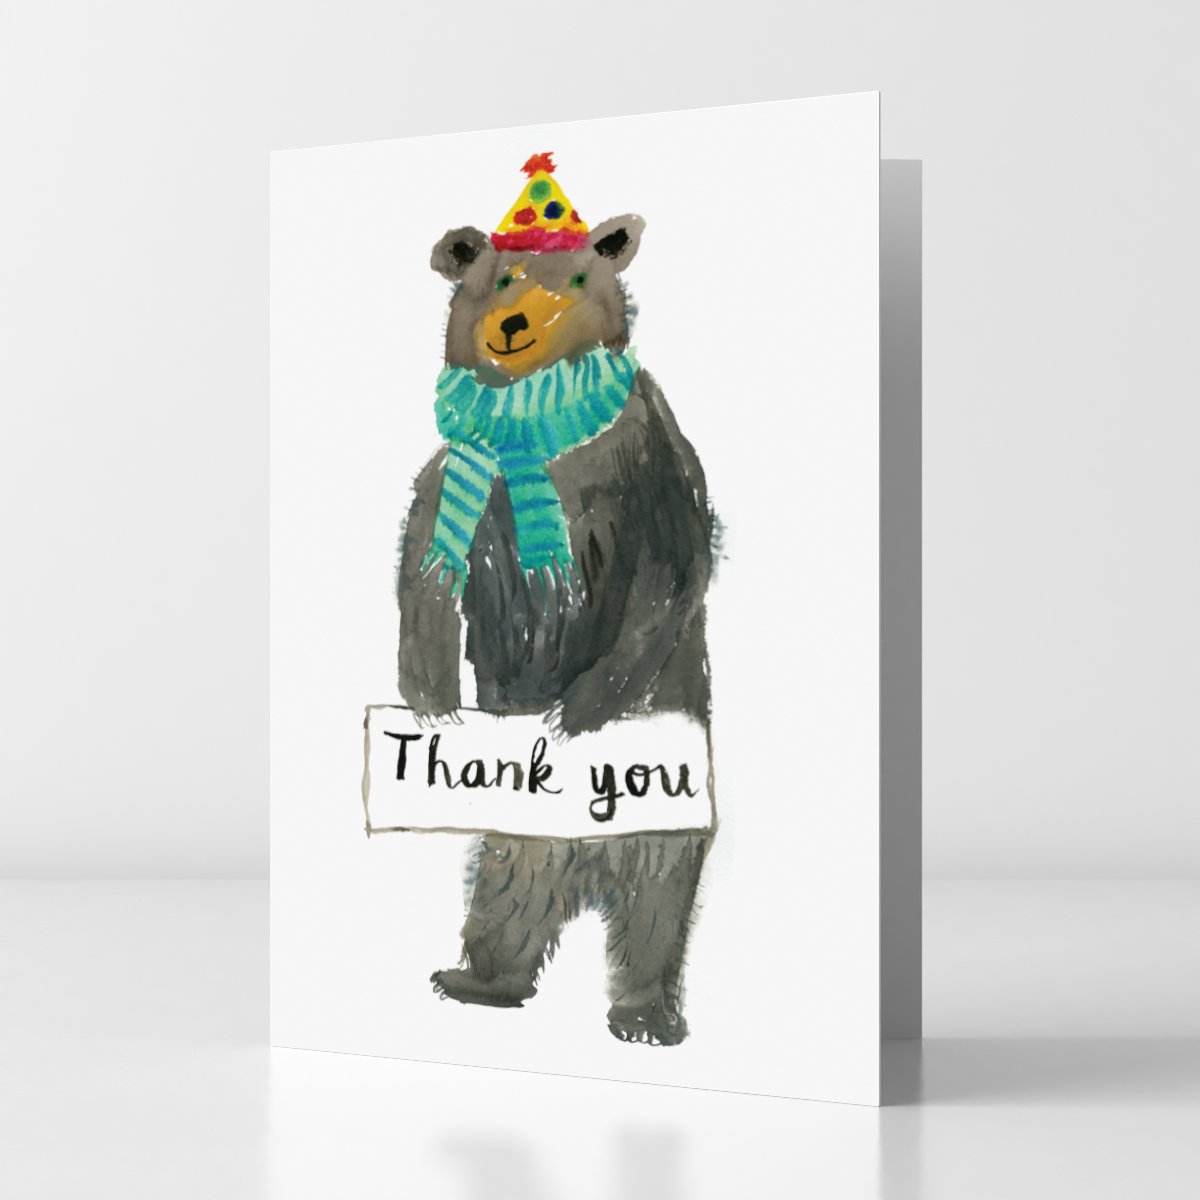 bear wearing hat, scarf and thank you sign